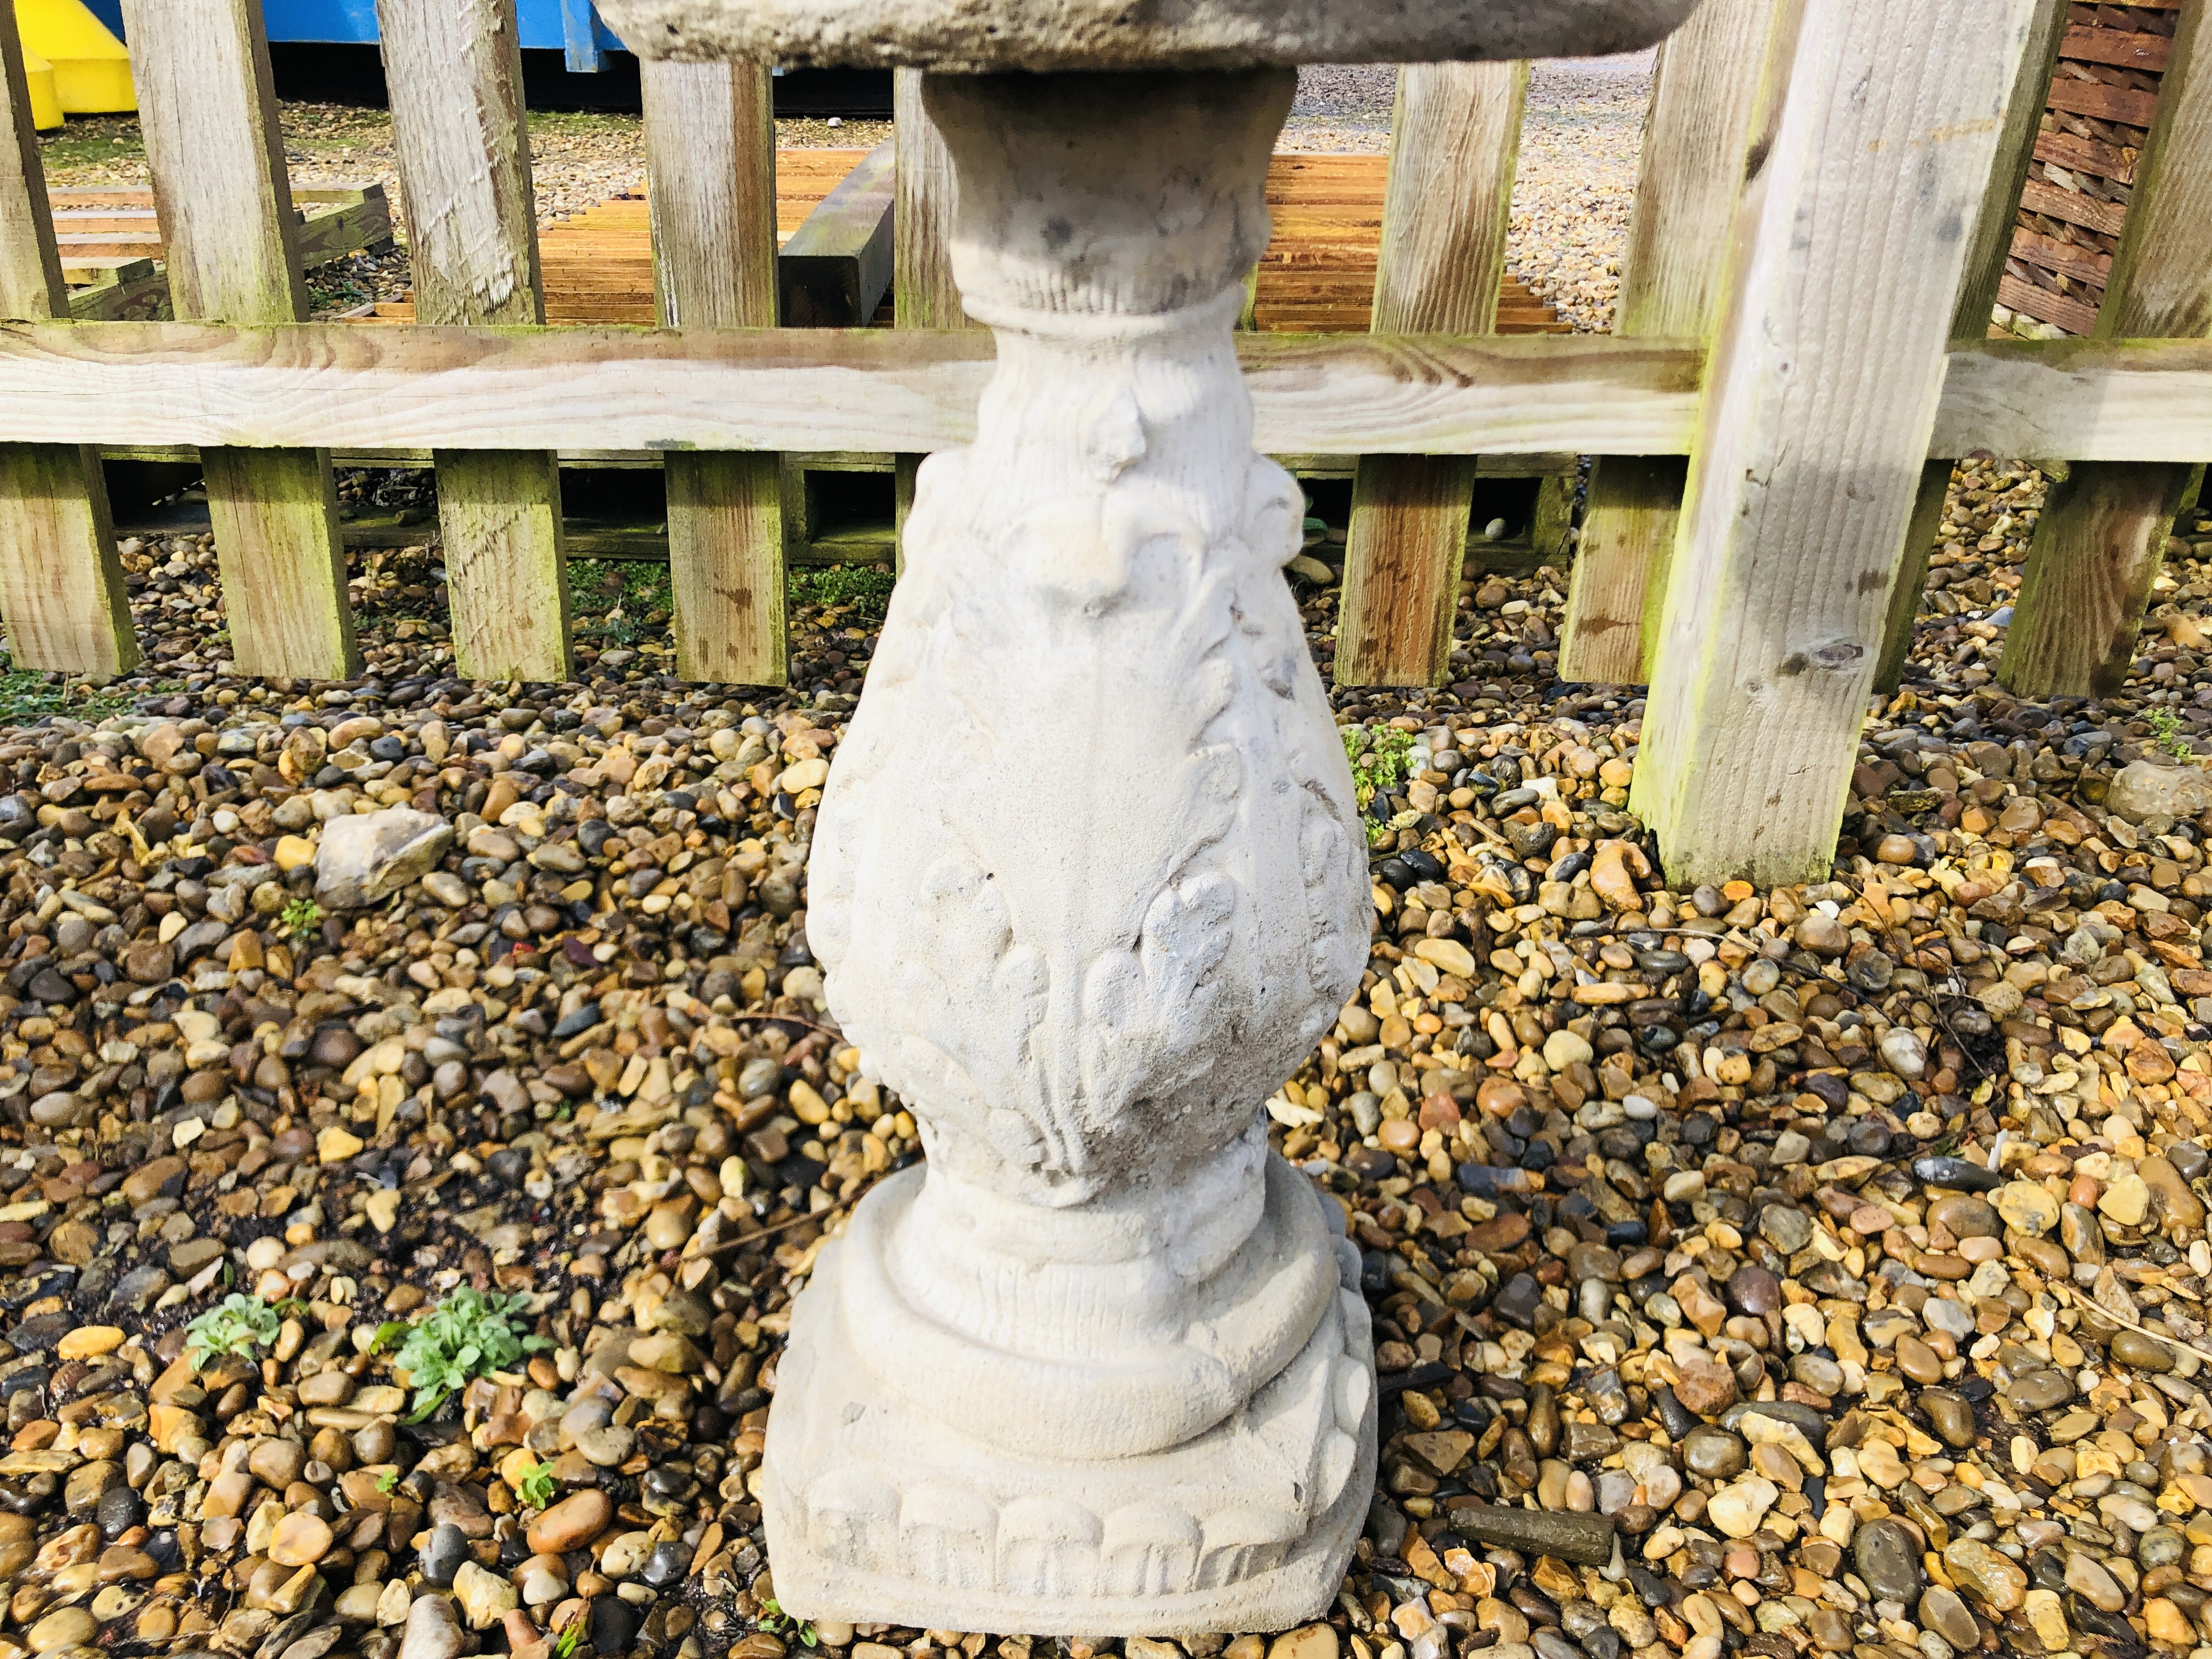 A STONEWORK BIRD BATH, THE BALUSTER SUPPORT WITH FOLIAGE DESIGN - HEIGHT 60CM. - Image 2 of 3